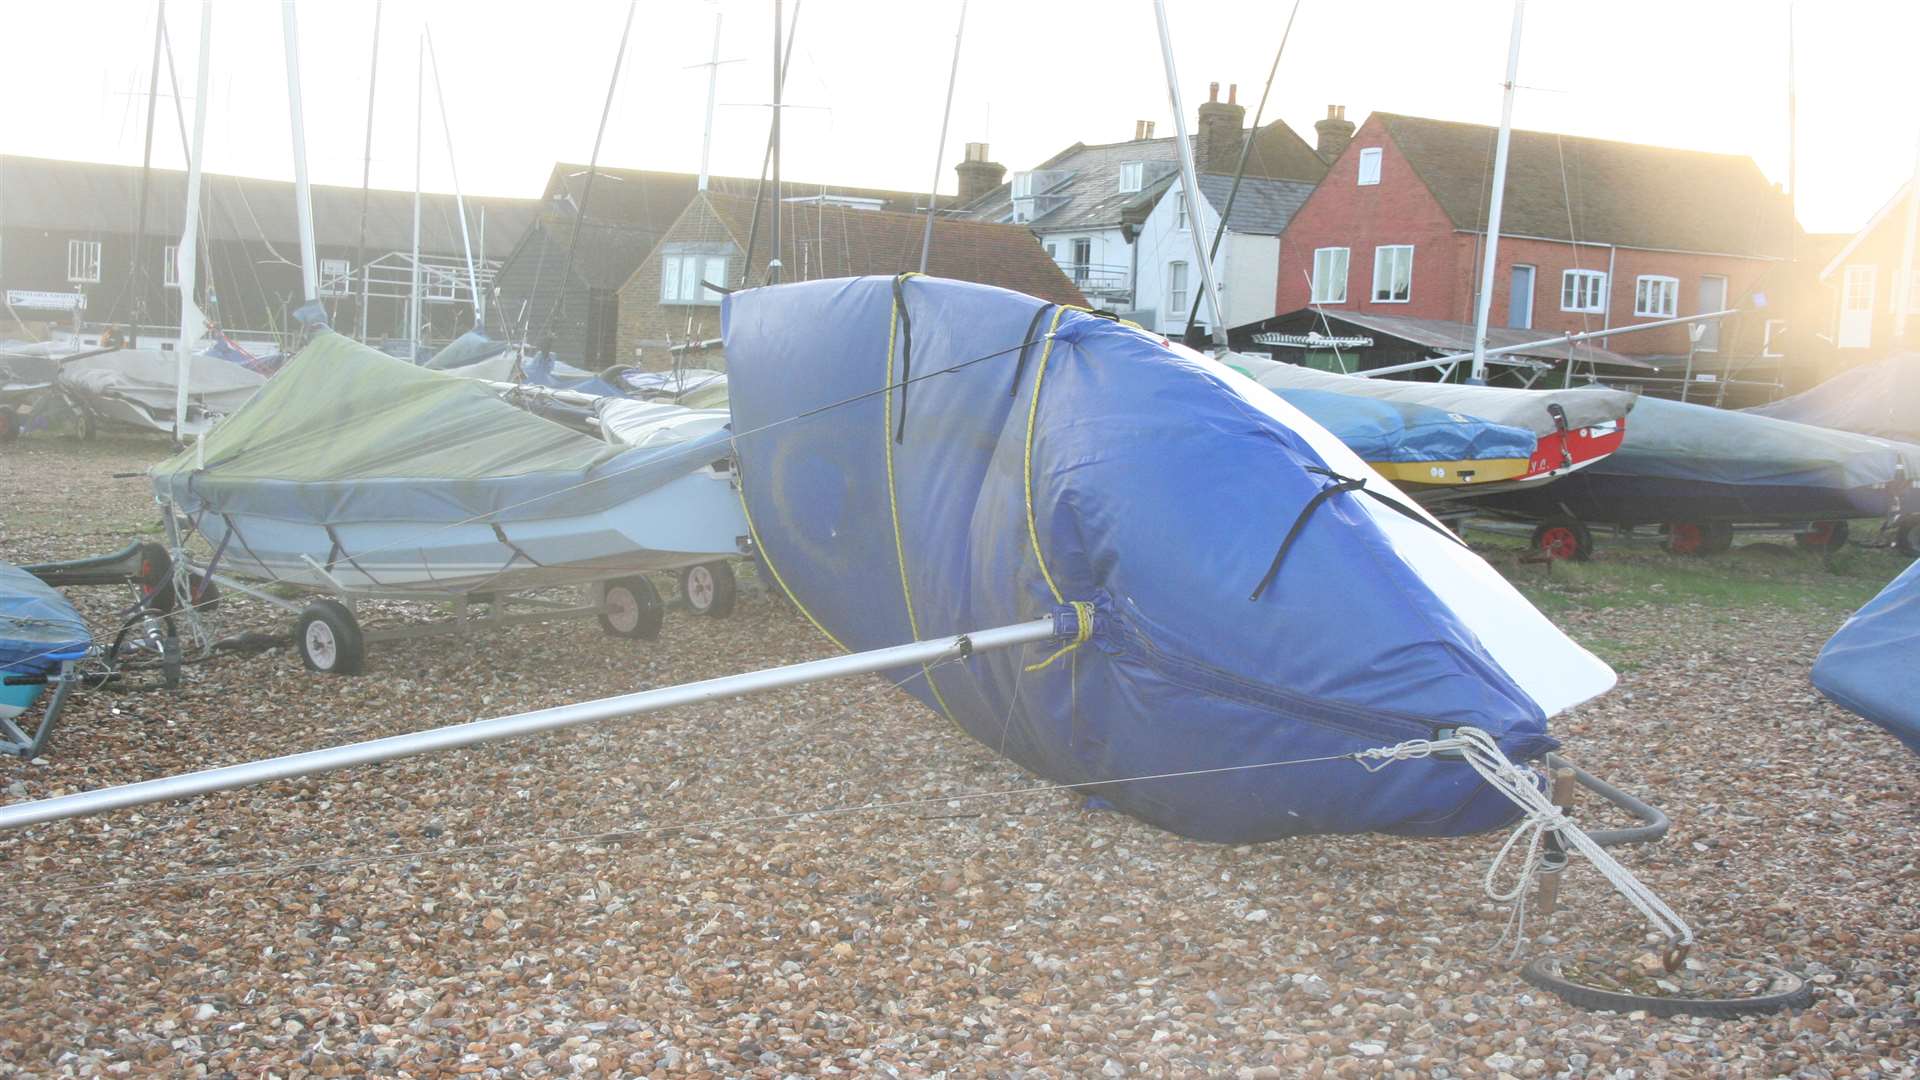 A boat blown over in the winds at Whitstable